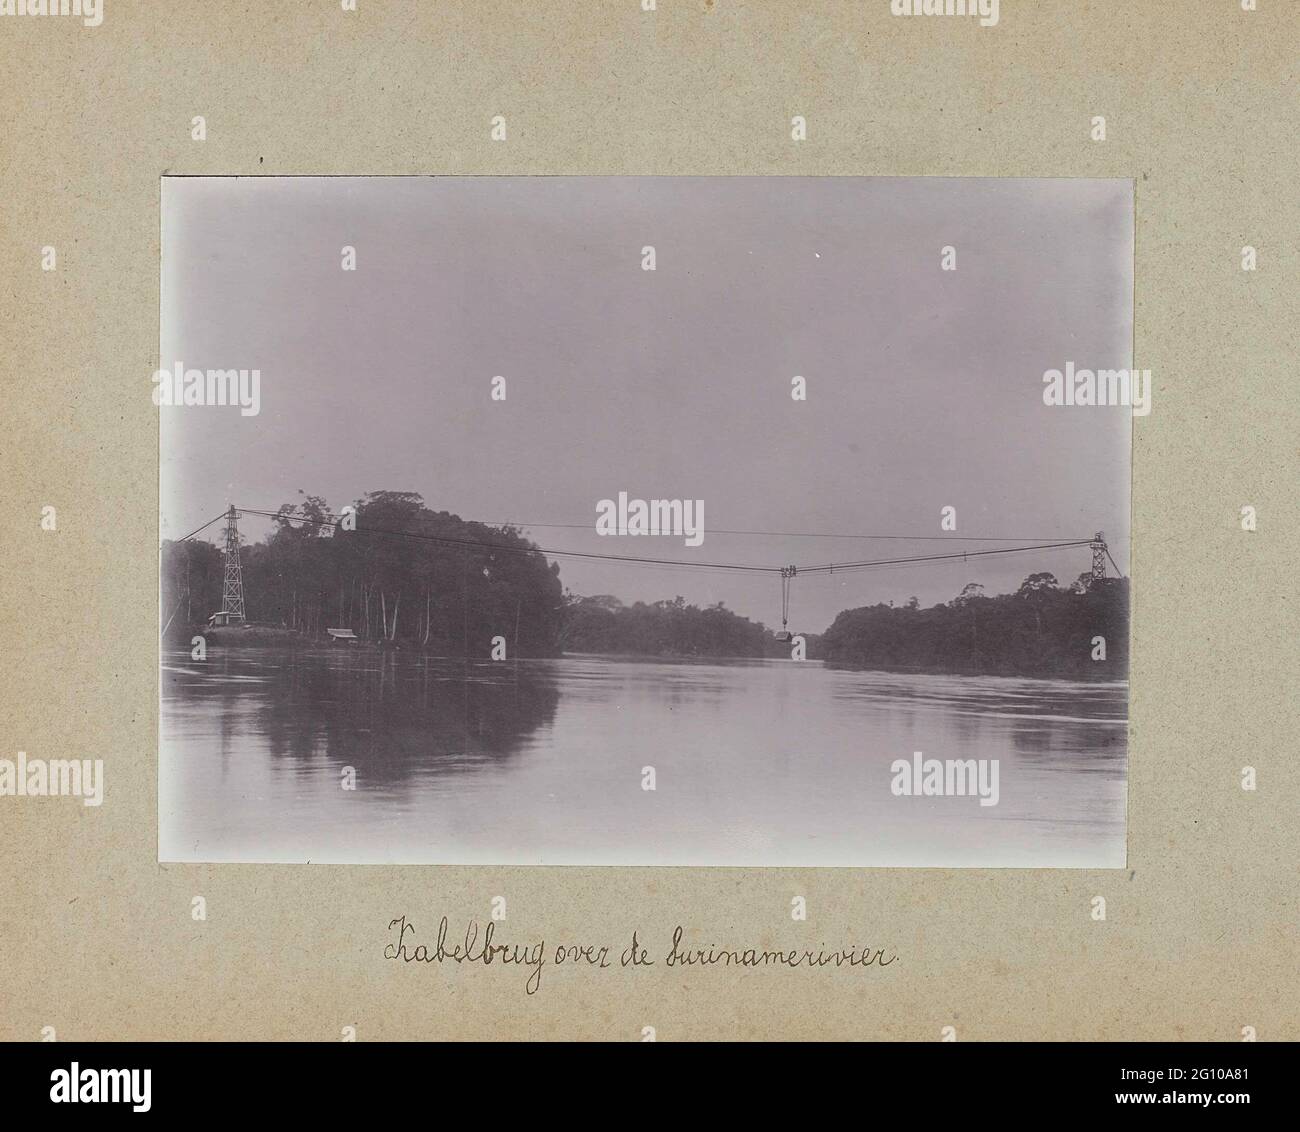 Cable bridge over the surinamer river. View of the cable bridge over the surinamer river. Photo in the photo album about the construction of the Lawaspoor road in Suriname in the years 1903-1912. Part of a group of objects from the Wesenhagen family in Suriname. Stock Photo